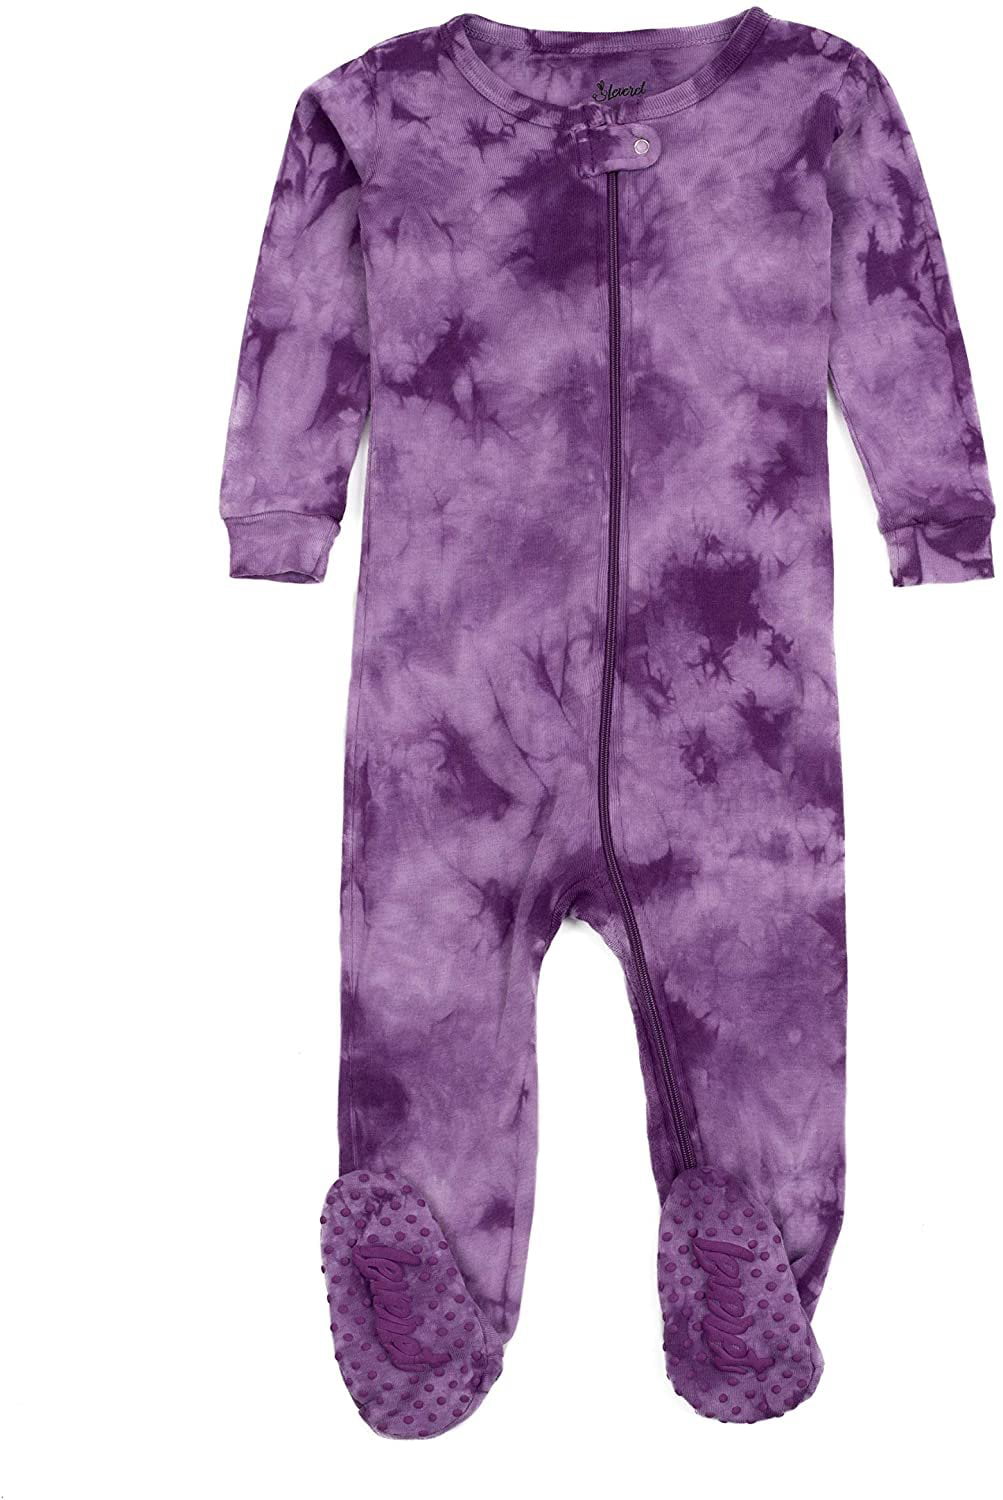 Size 3 Months-5 Years Leveret Kids & Toddler Footed Pajamas Boys Girls 100% Cotton Tie Dye